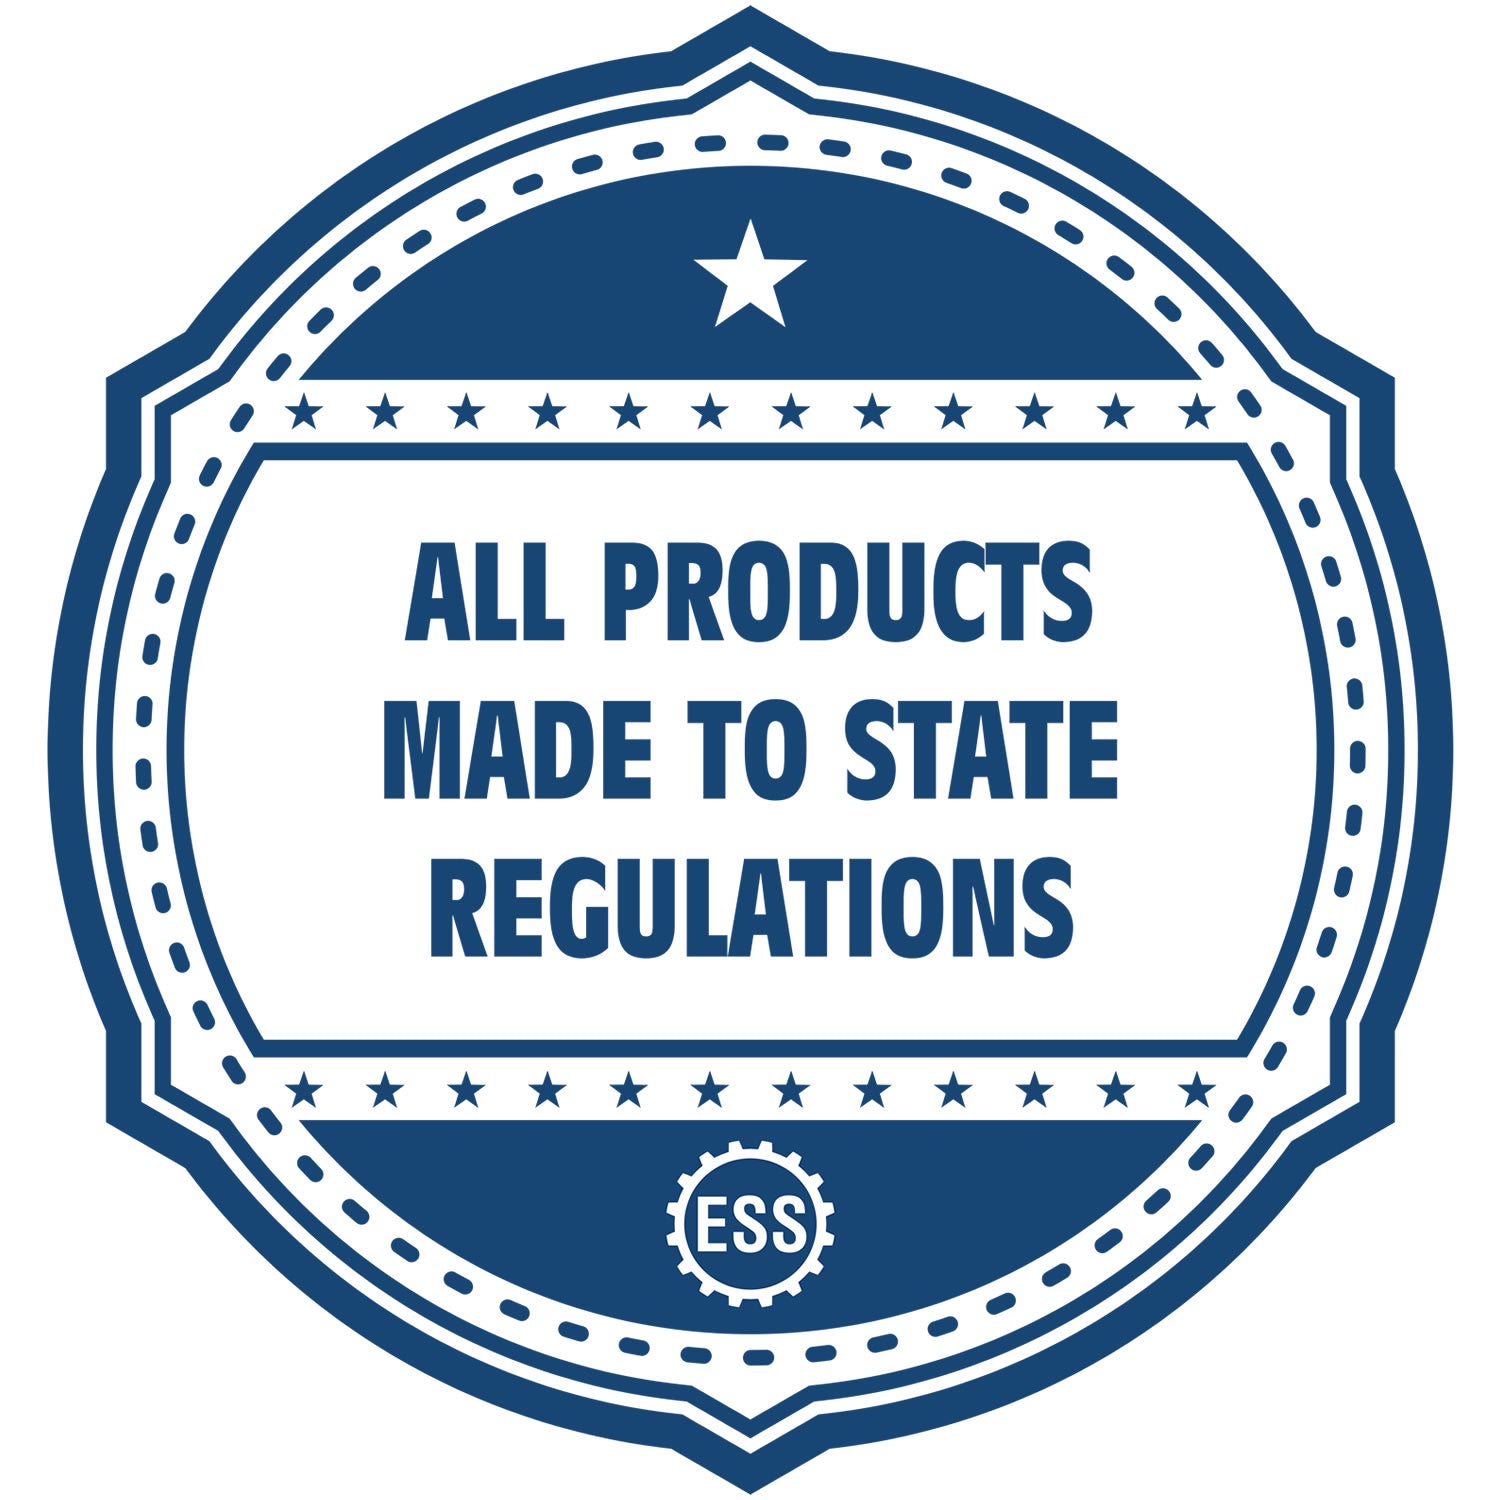 An icon or badge element for the Slim Pre-Inked North Carolina Architect Seal Stamp showing that this product is made in compliance with state regulations.